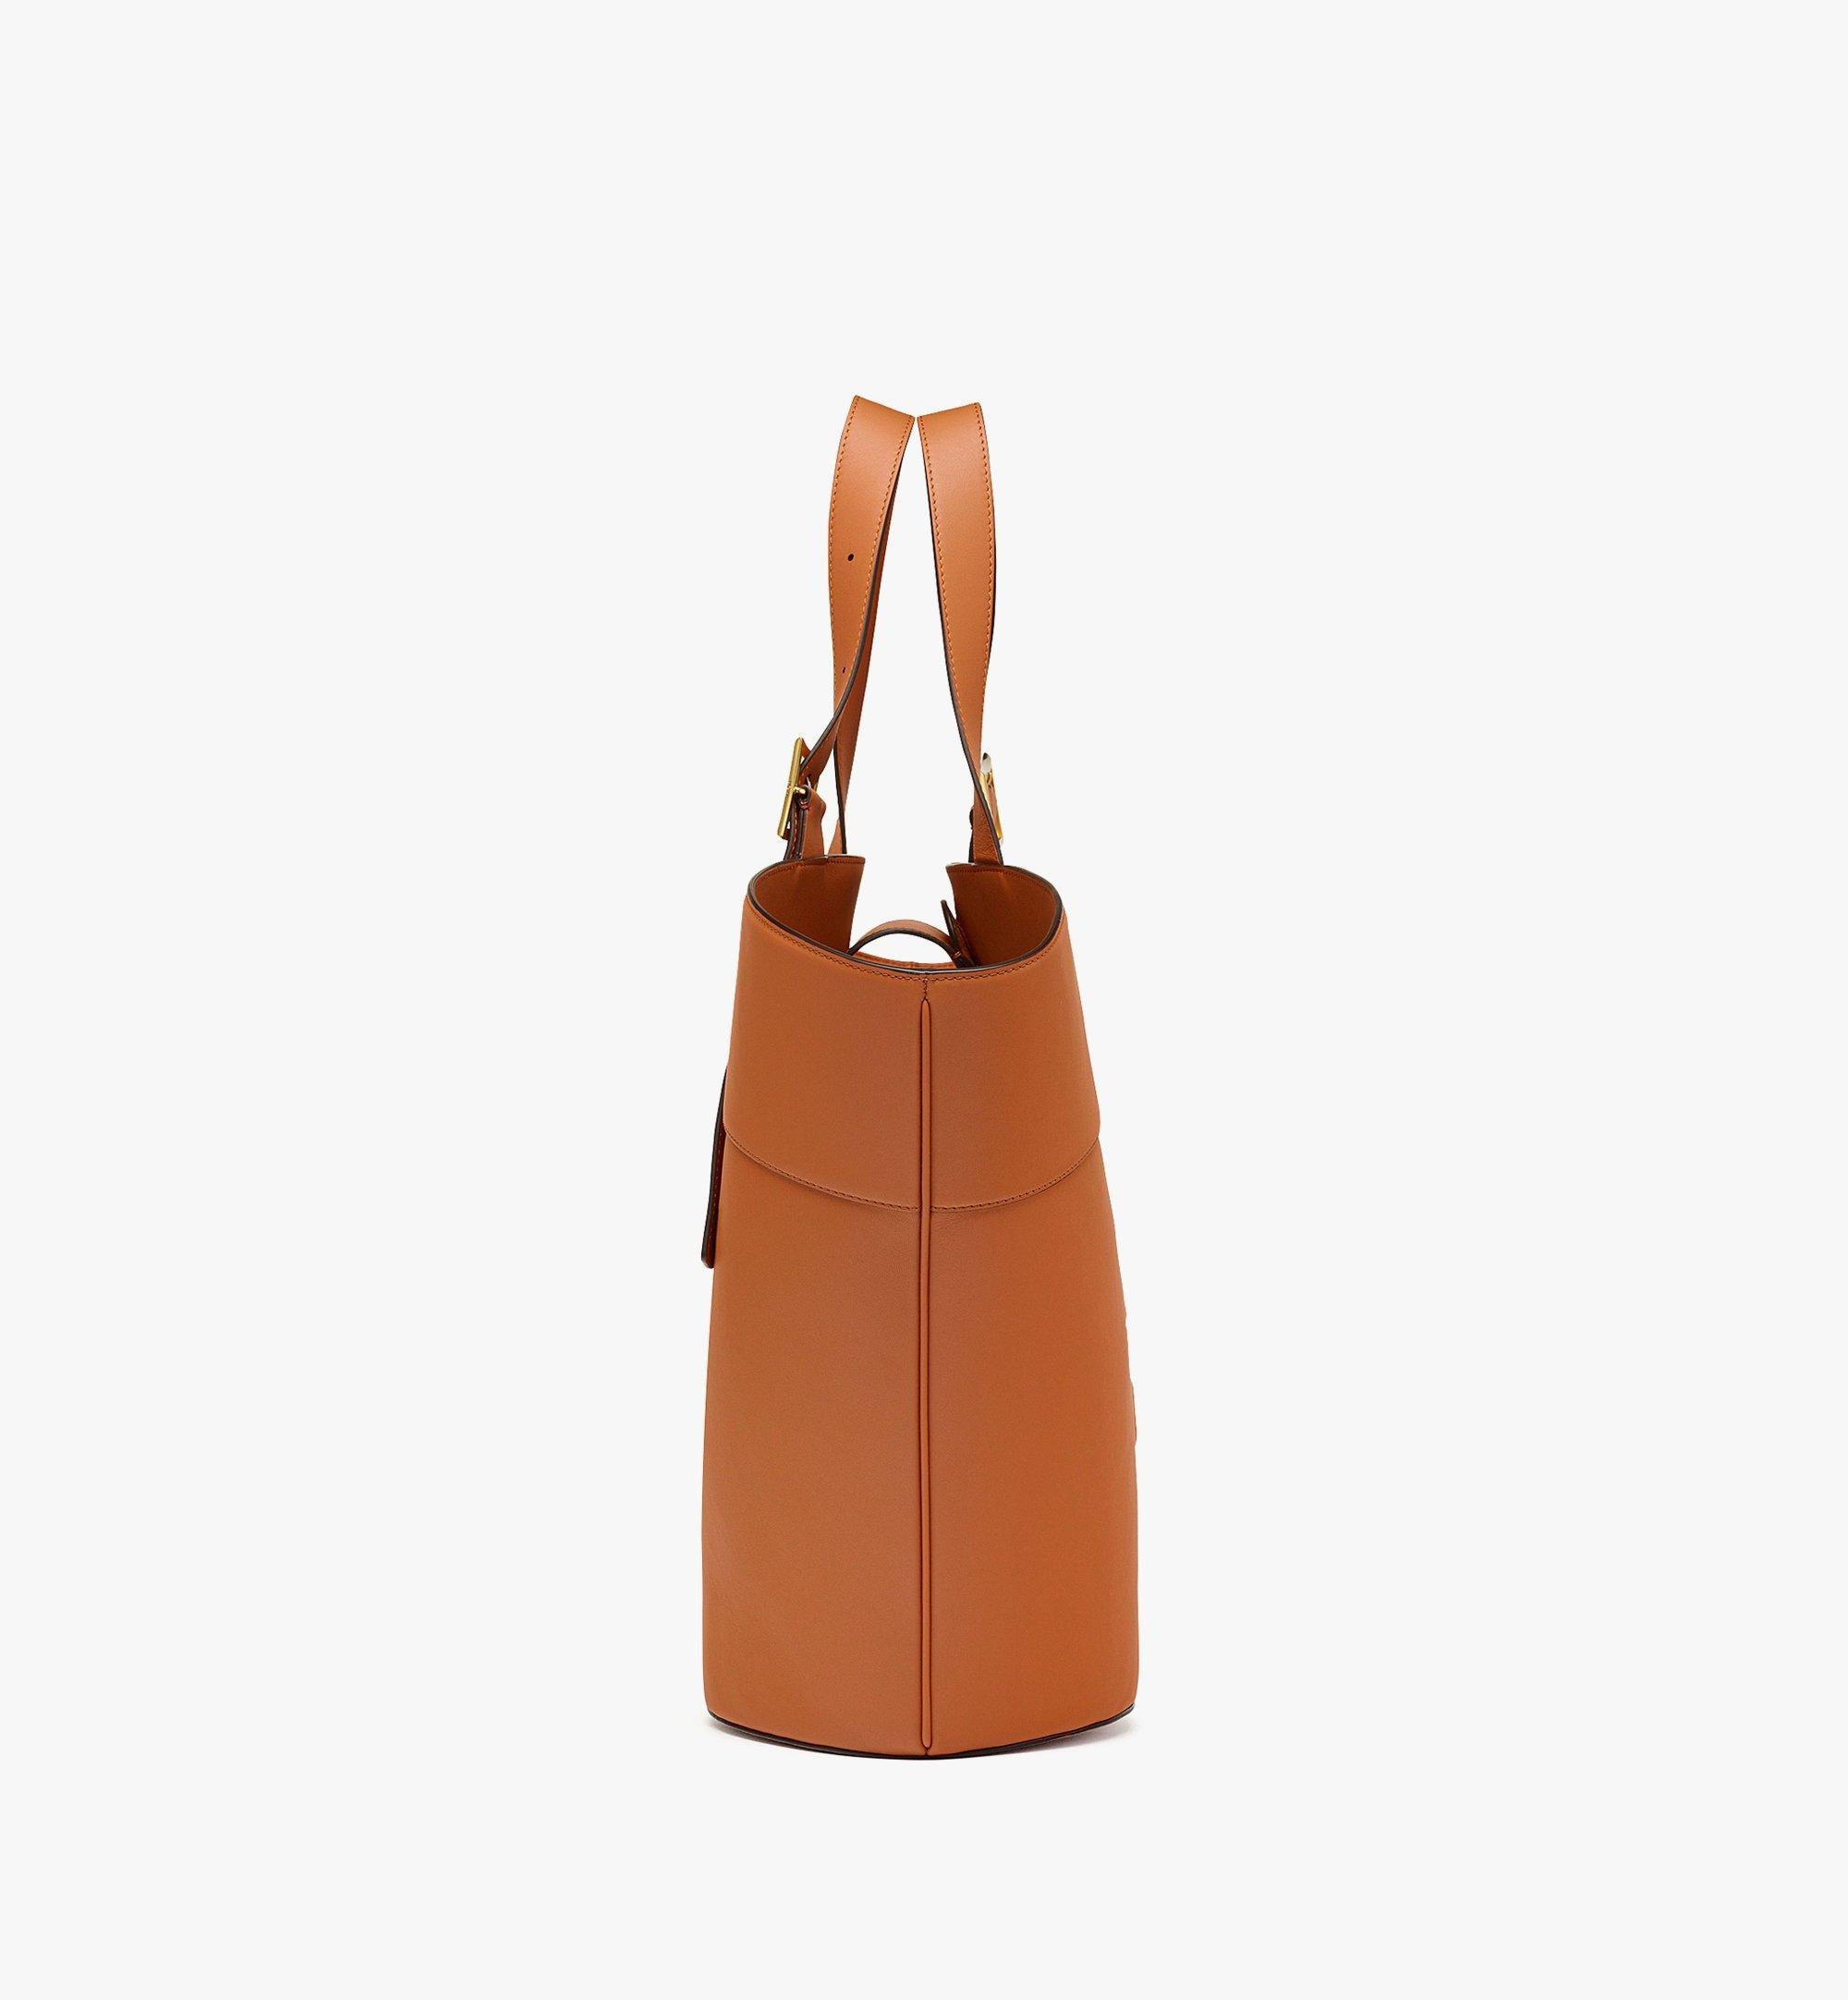 Himmel Tote in Spanish Nappa Leather - 2